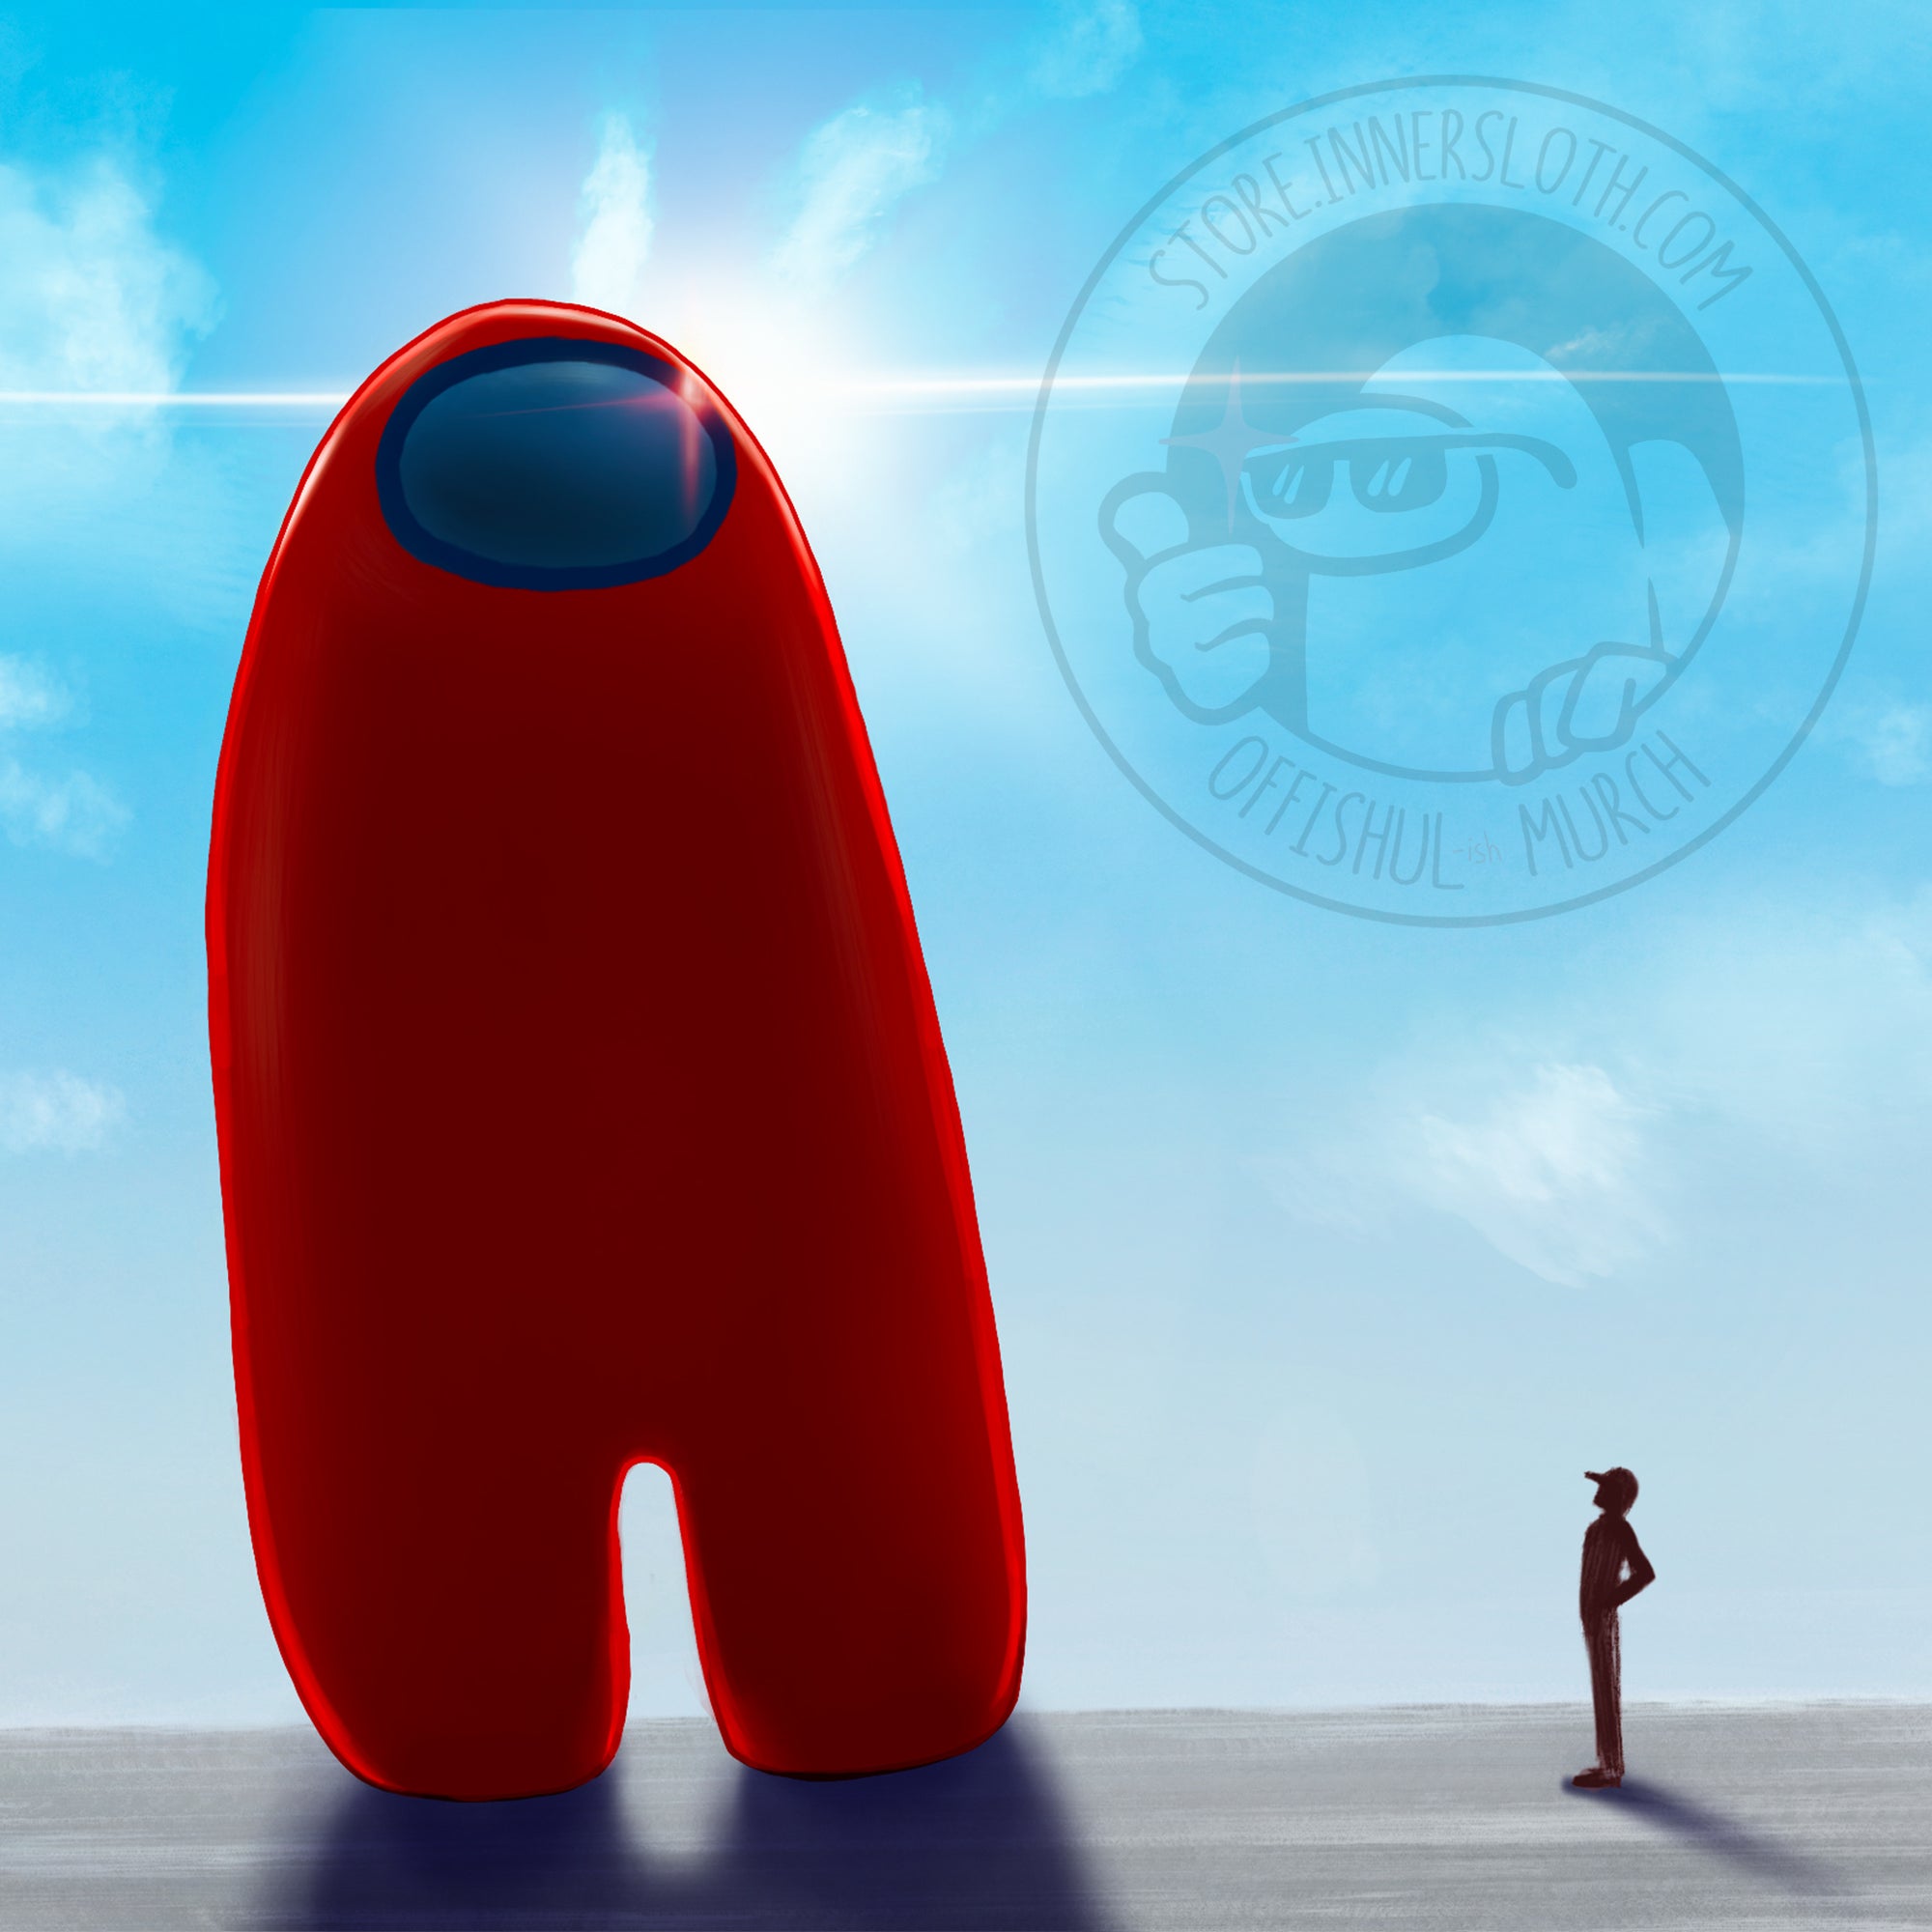 An illustration by Zara Varin depicts a 30ft tall  HUMUNGUS Red Crewmate towering over a very tiny human person.